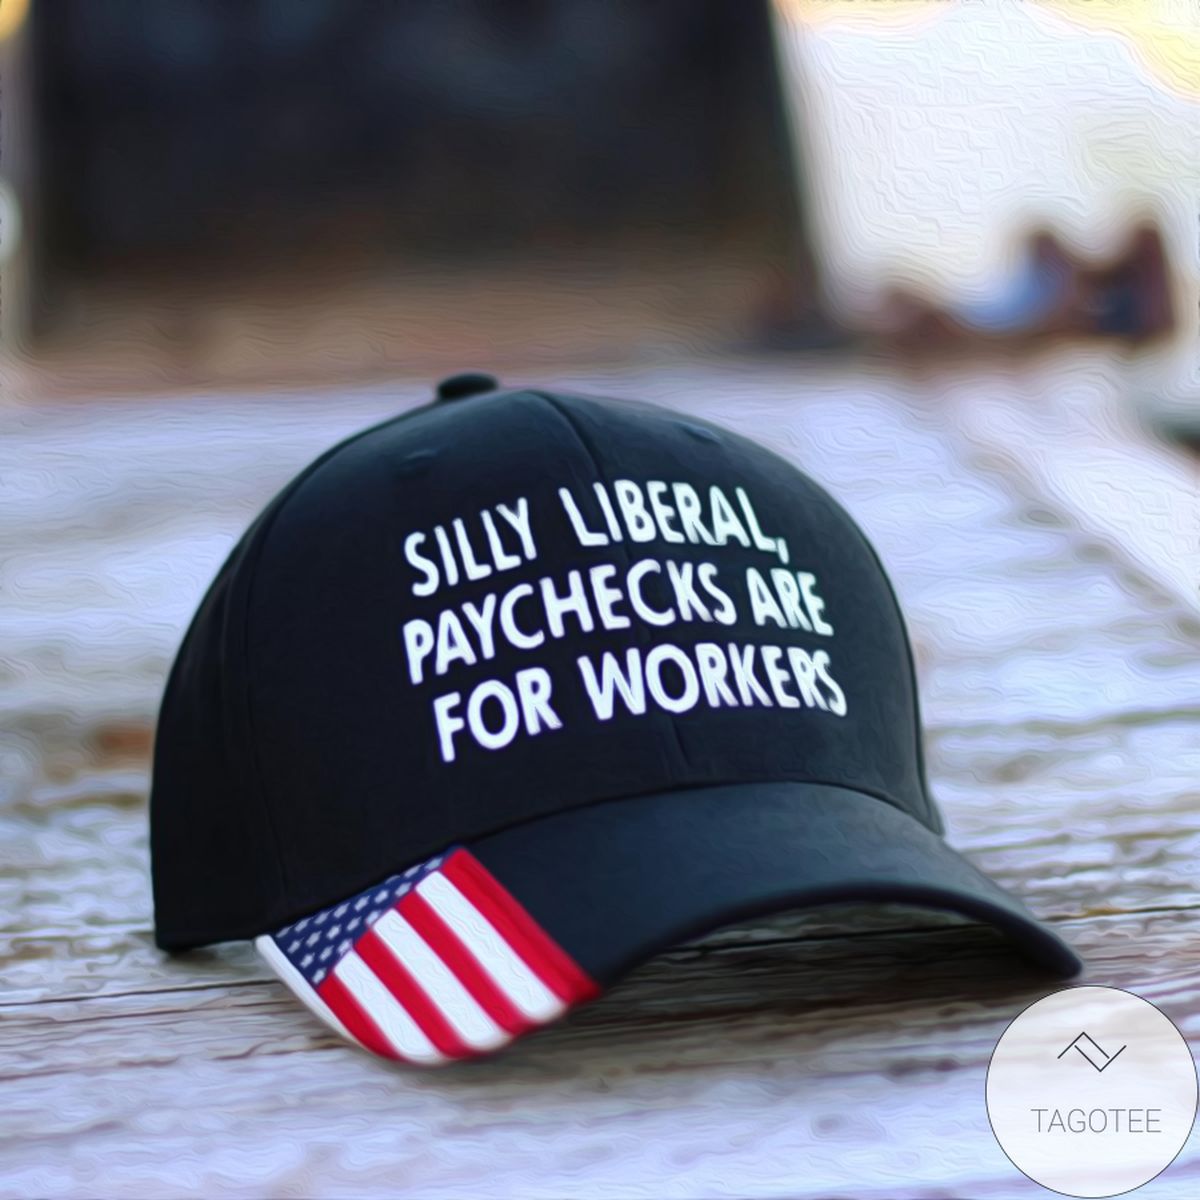 Silly Liberal Paychecks Are For Workers Cap